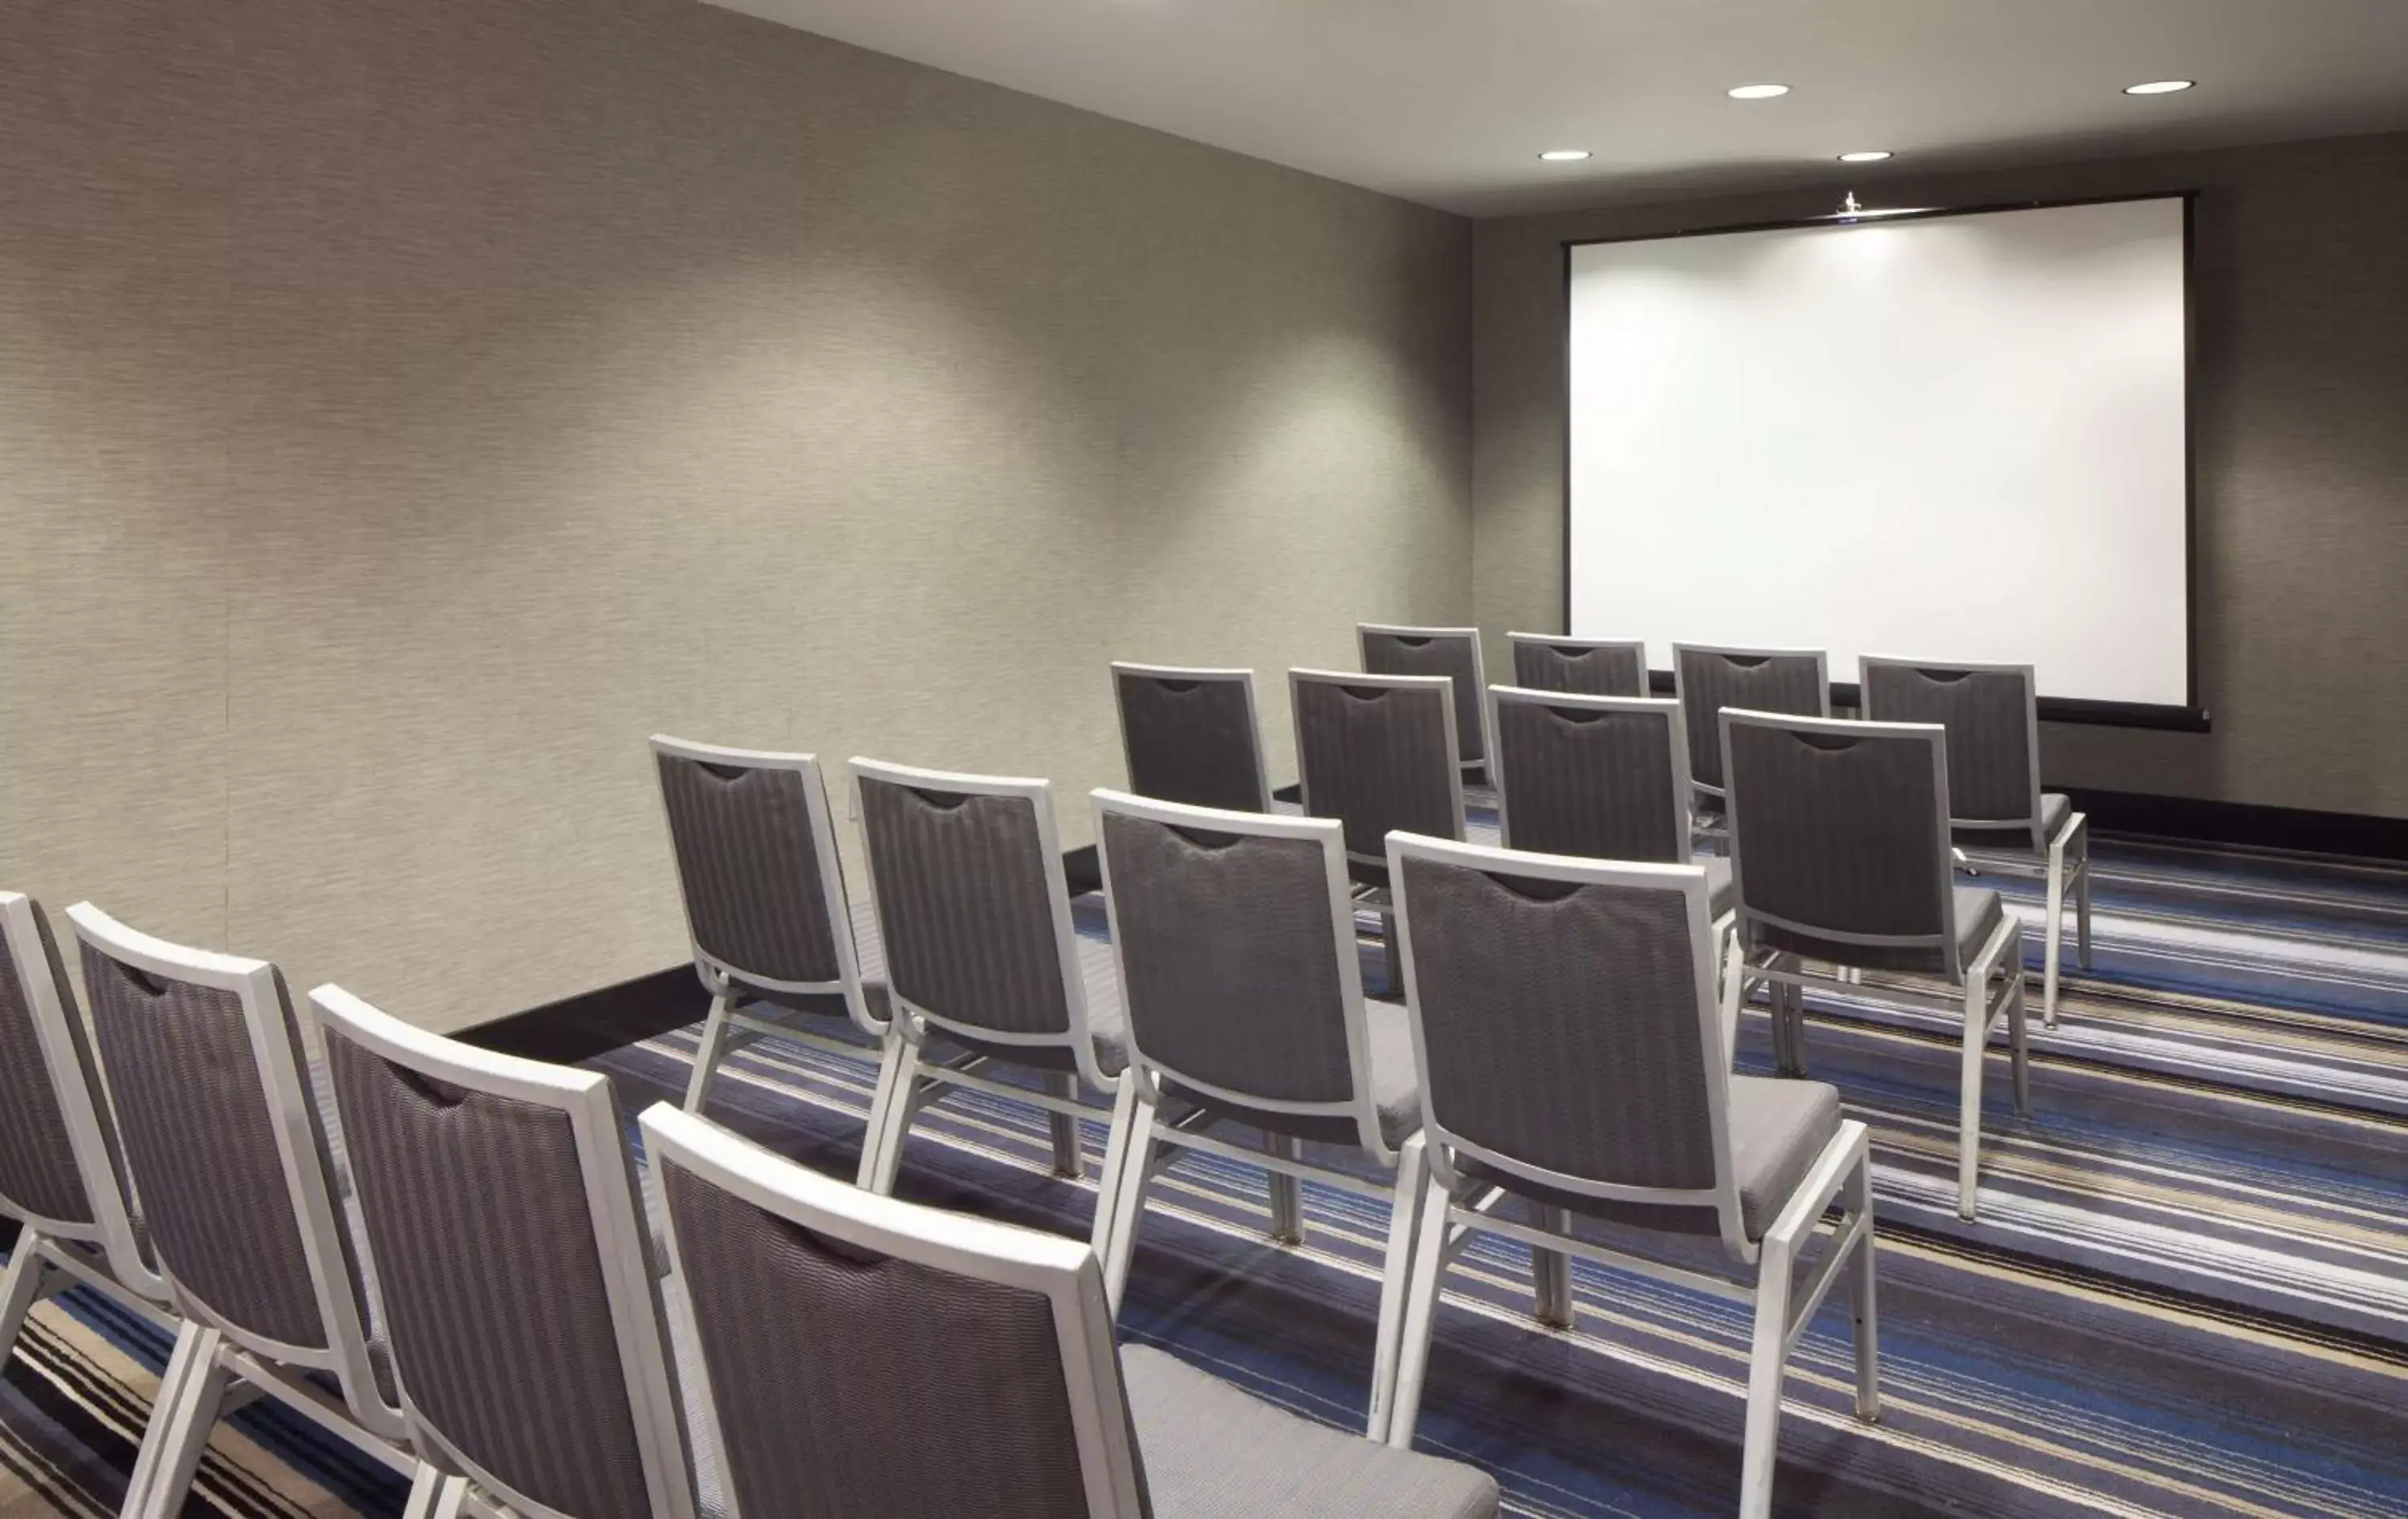 Meeting/conference room in Hilton Houston NASA Clear Lake